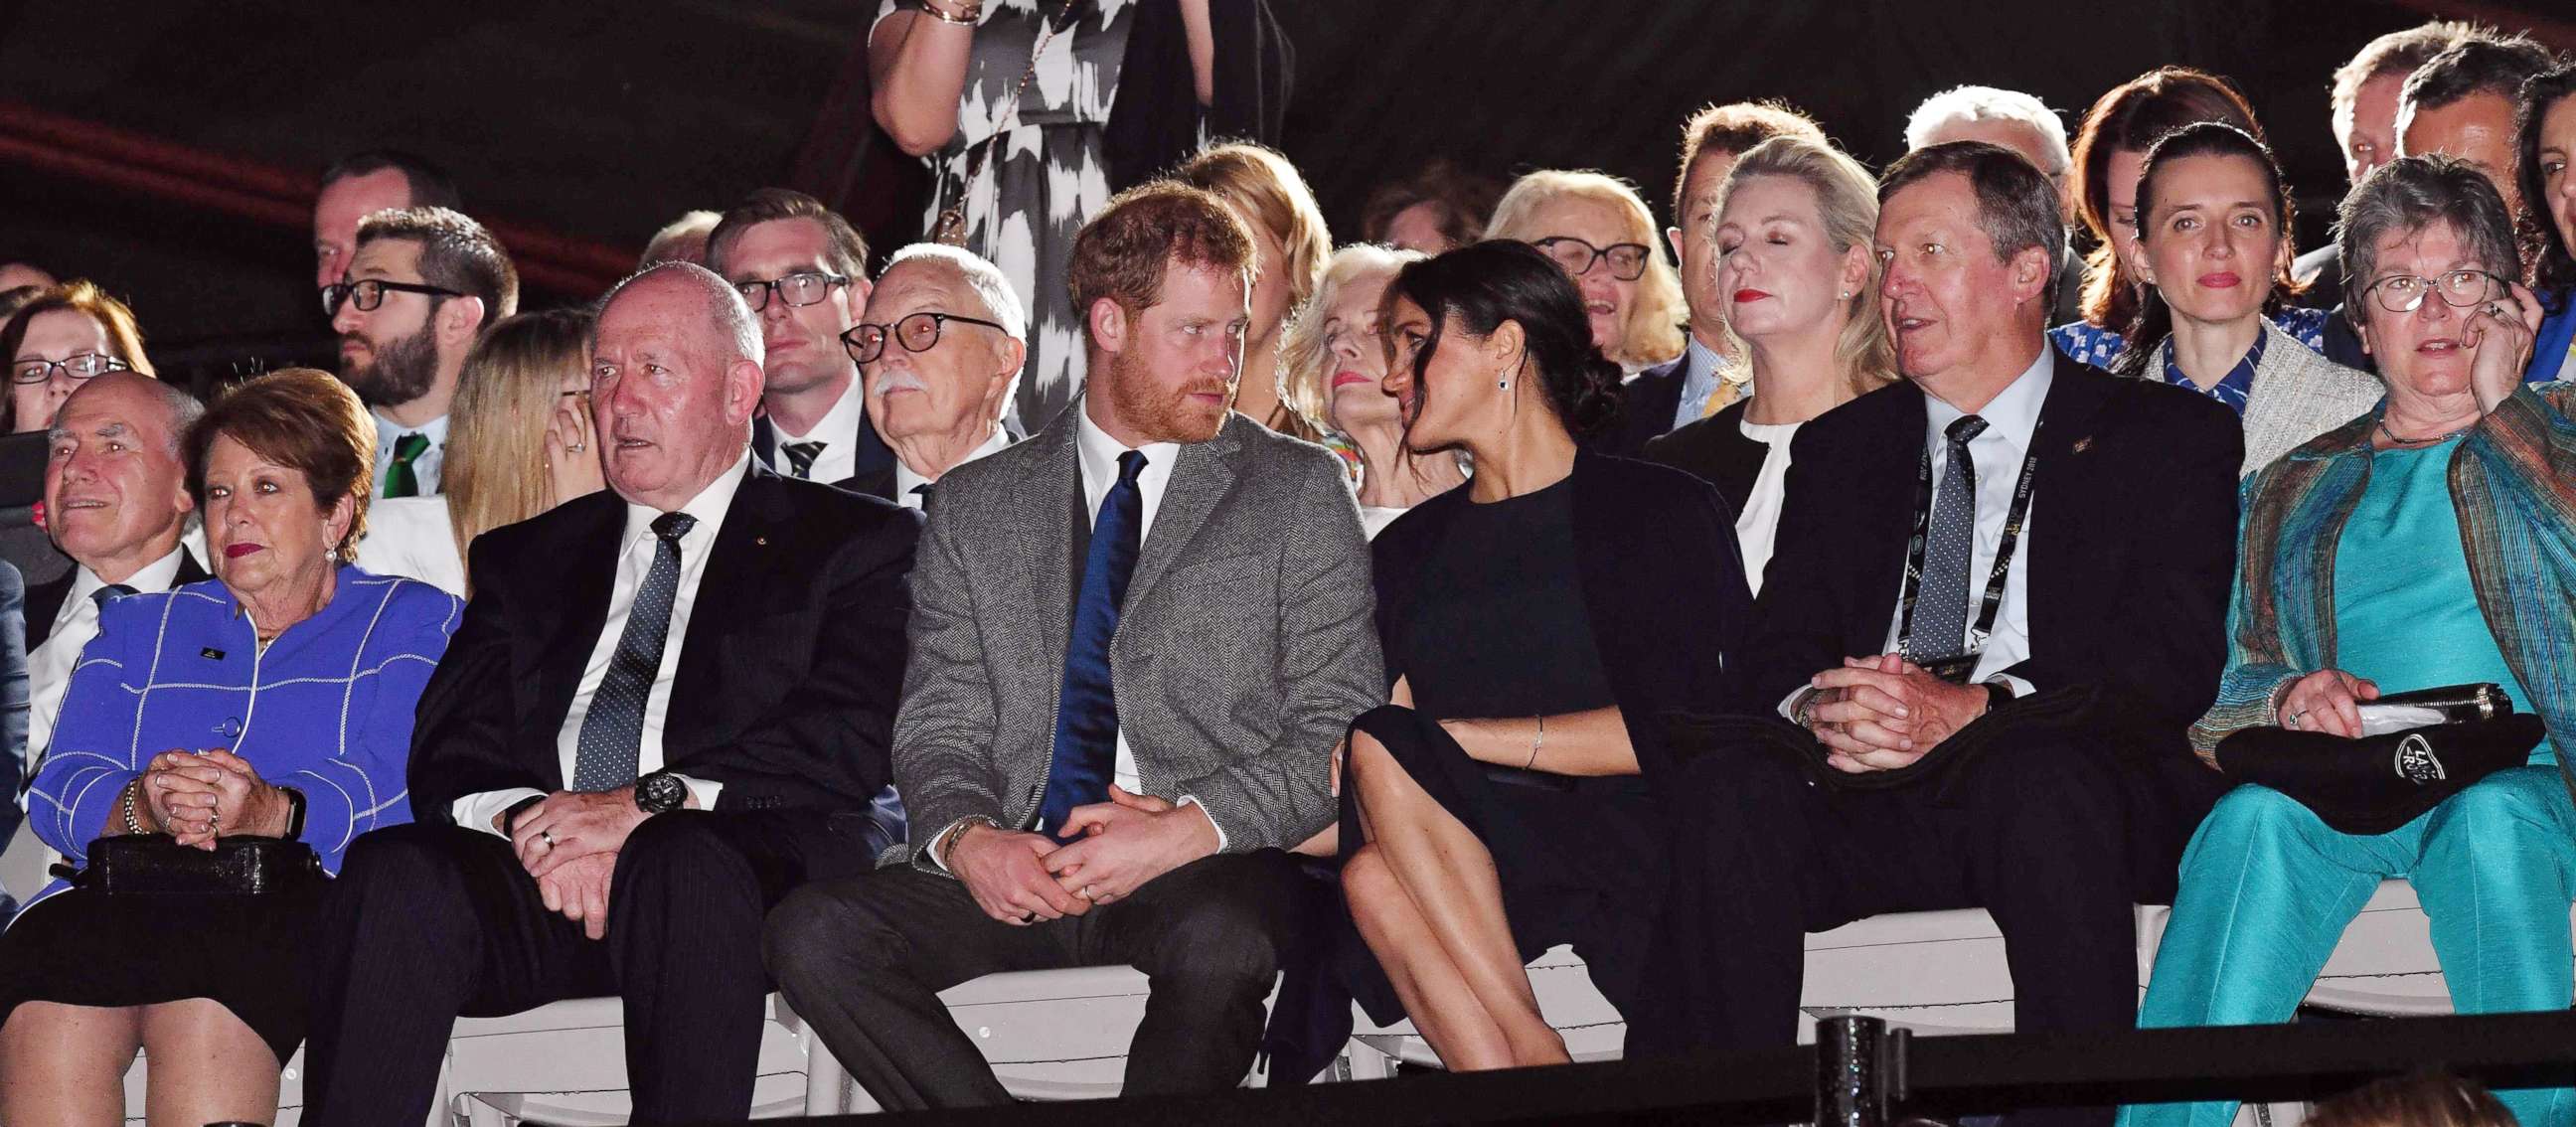 PHOTO: Prince Harry, The Duke of Sussex and Meghan Markle, The Duchess of Sussex talk during the opening ceremony of the Invictus Games in Sydney, Oct. 20, 2018.